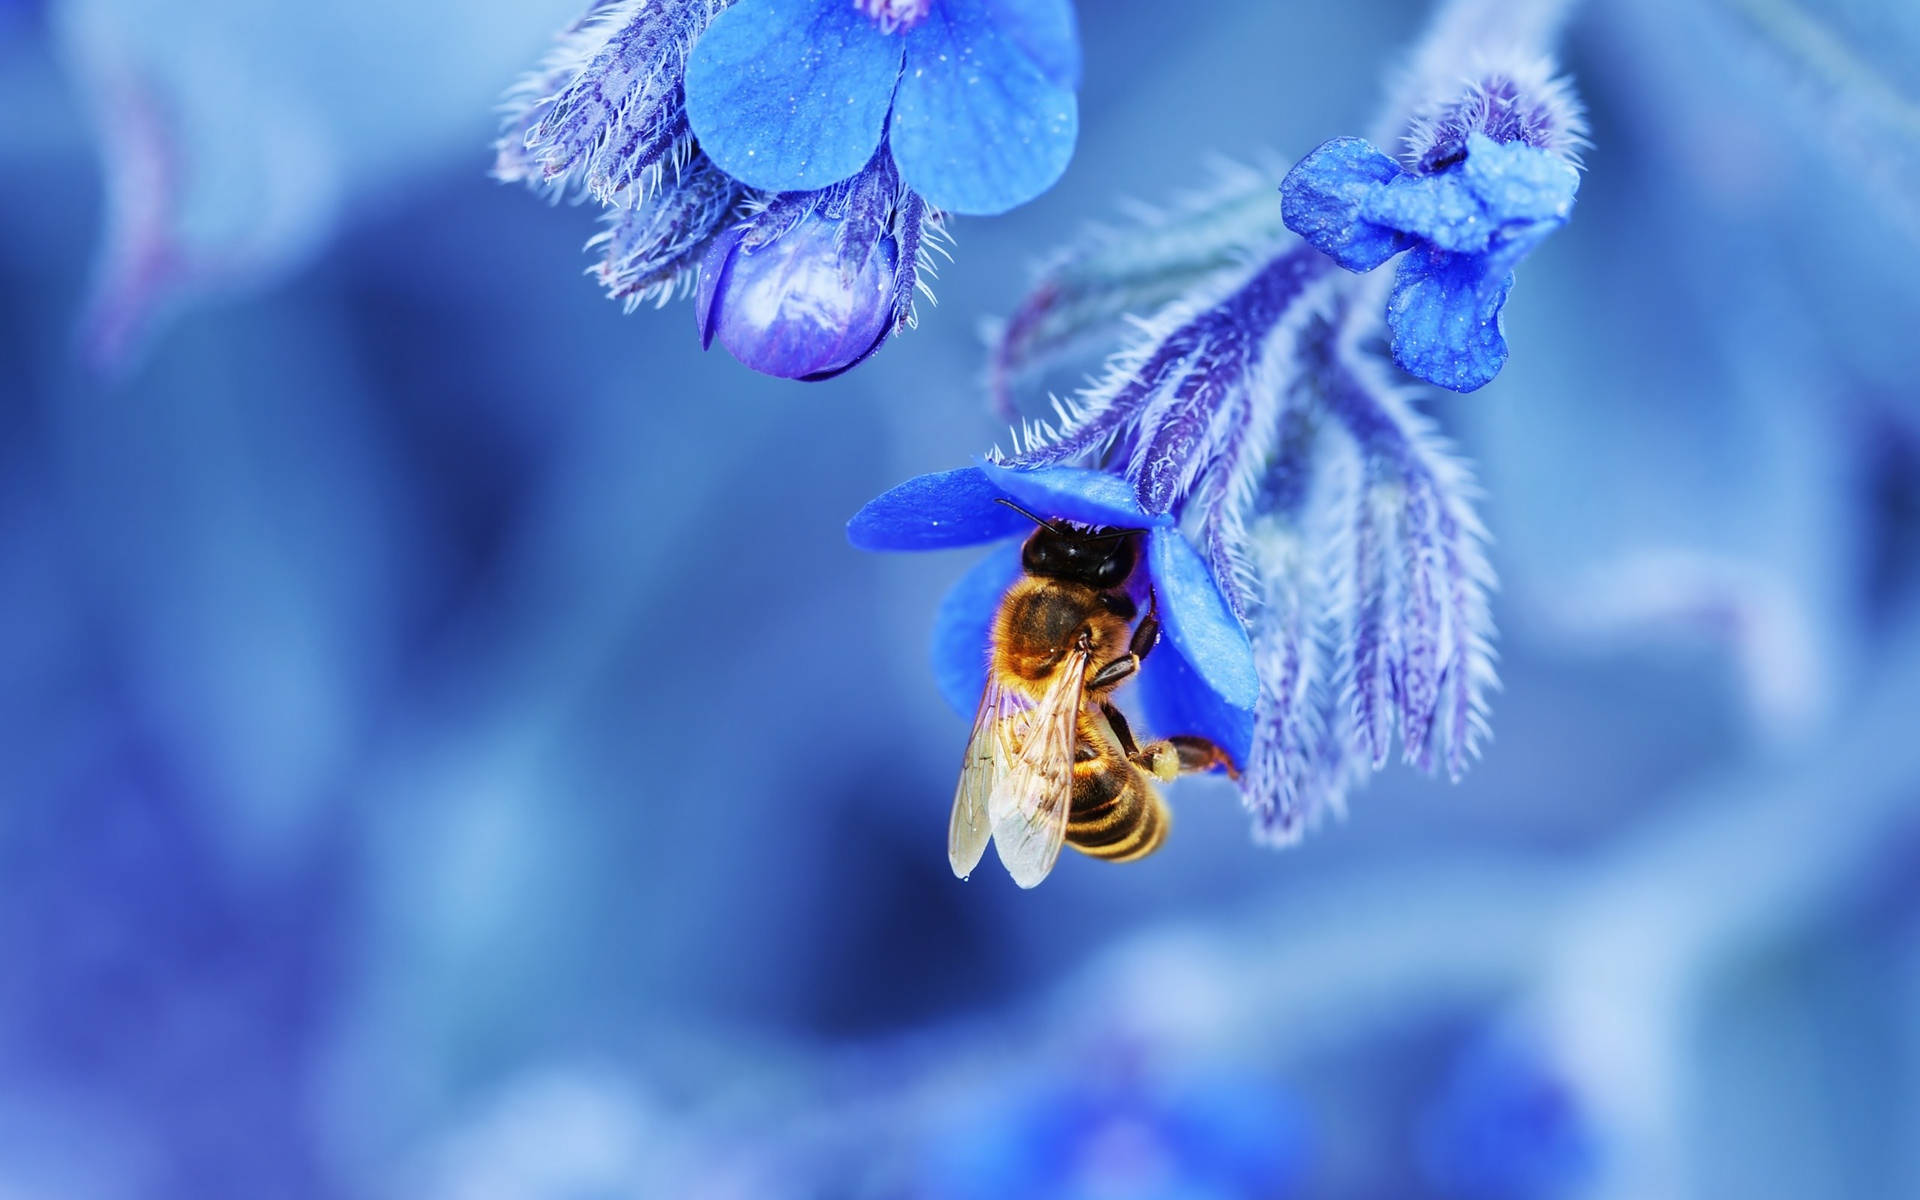 Insect Bee On Blue Flower